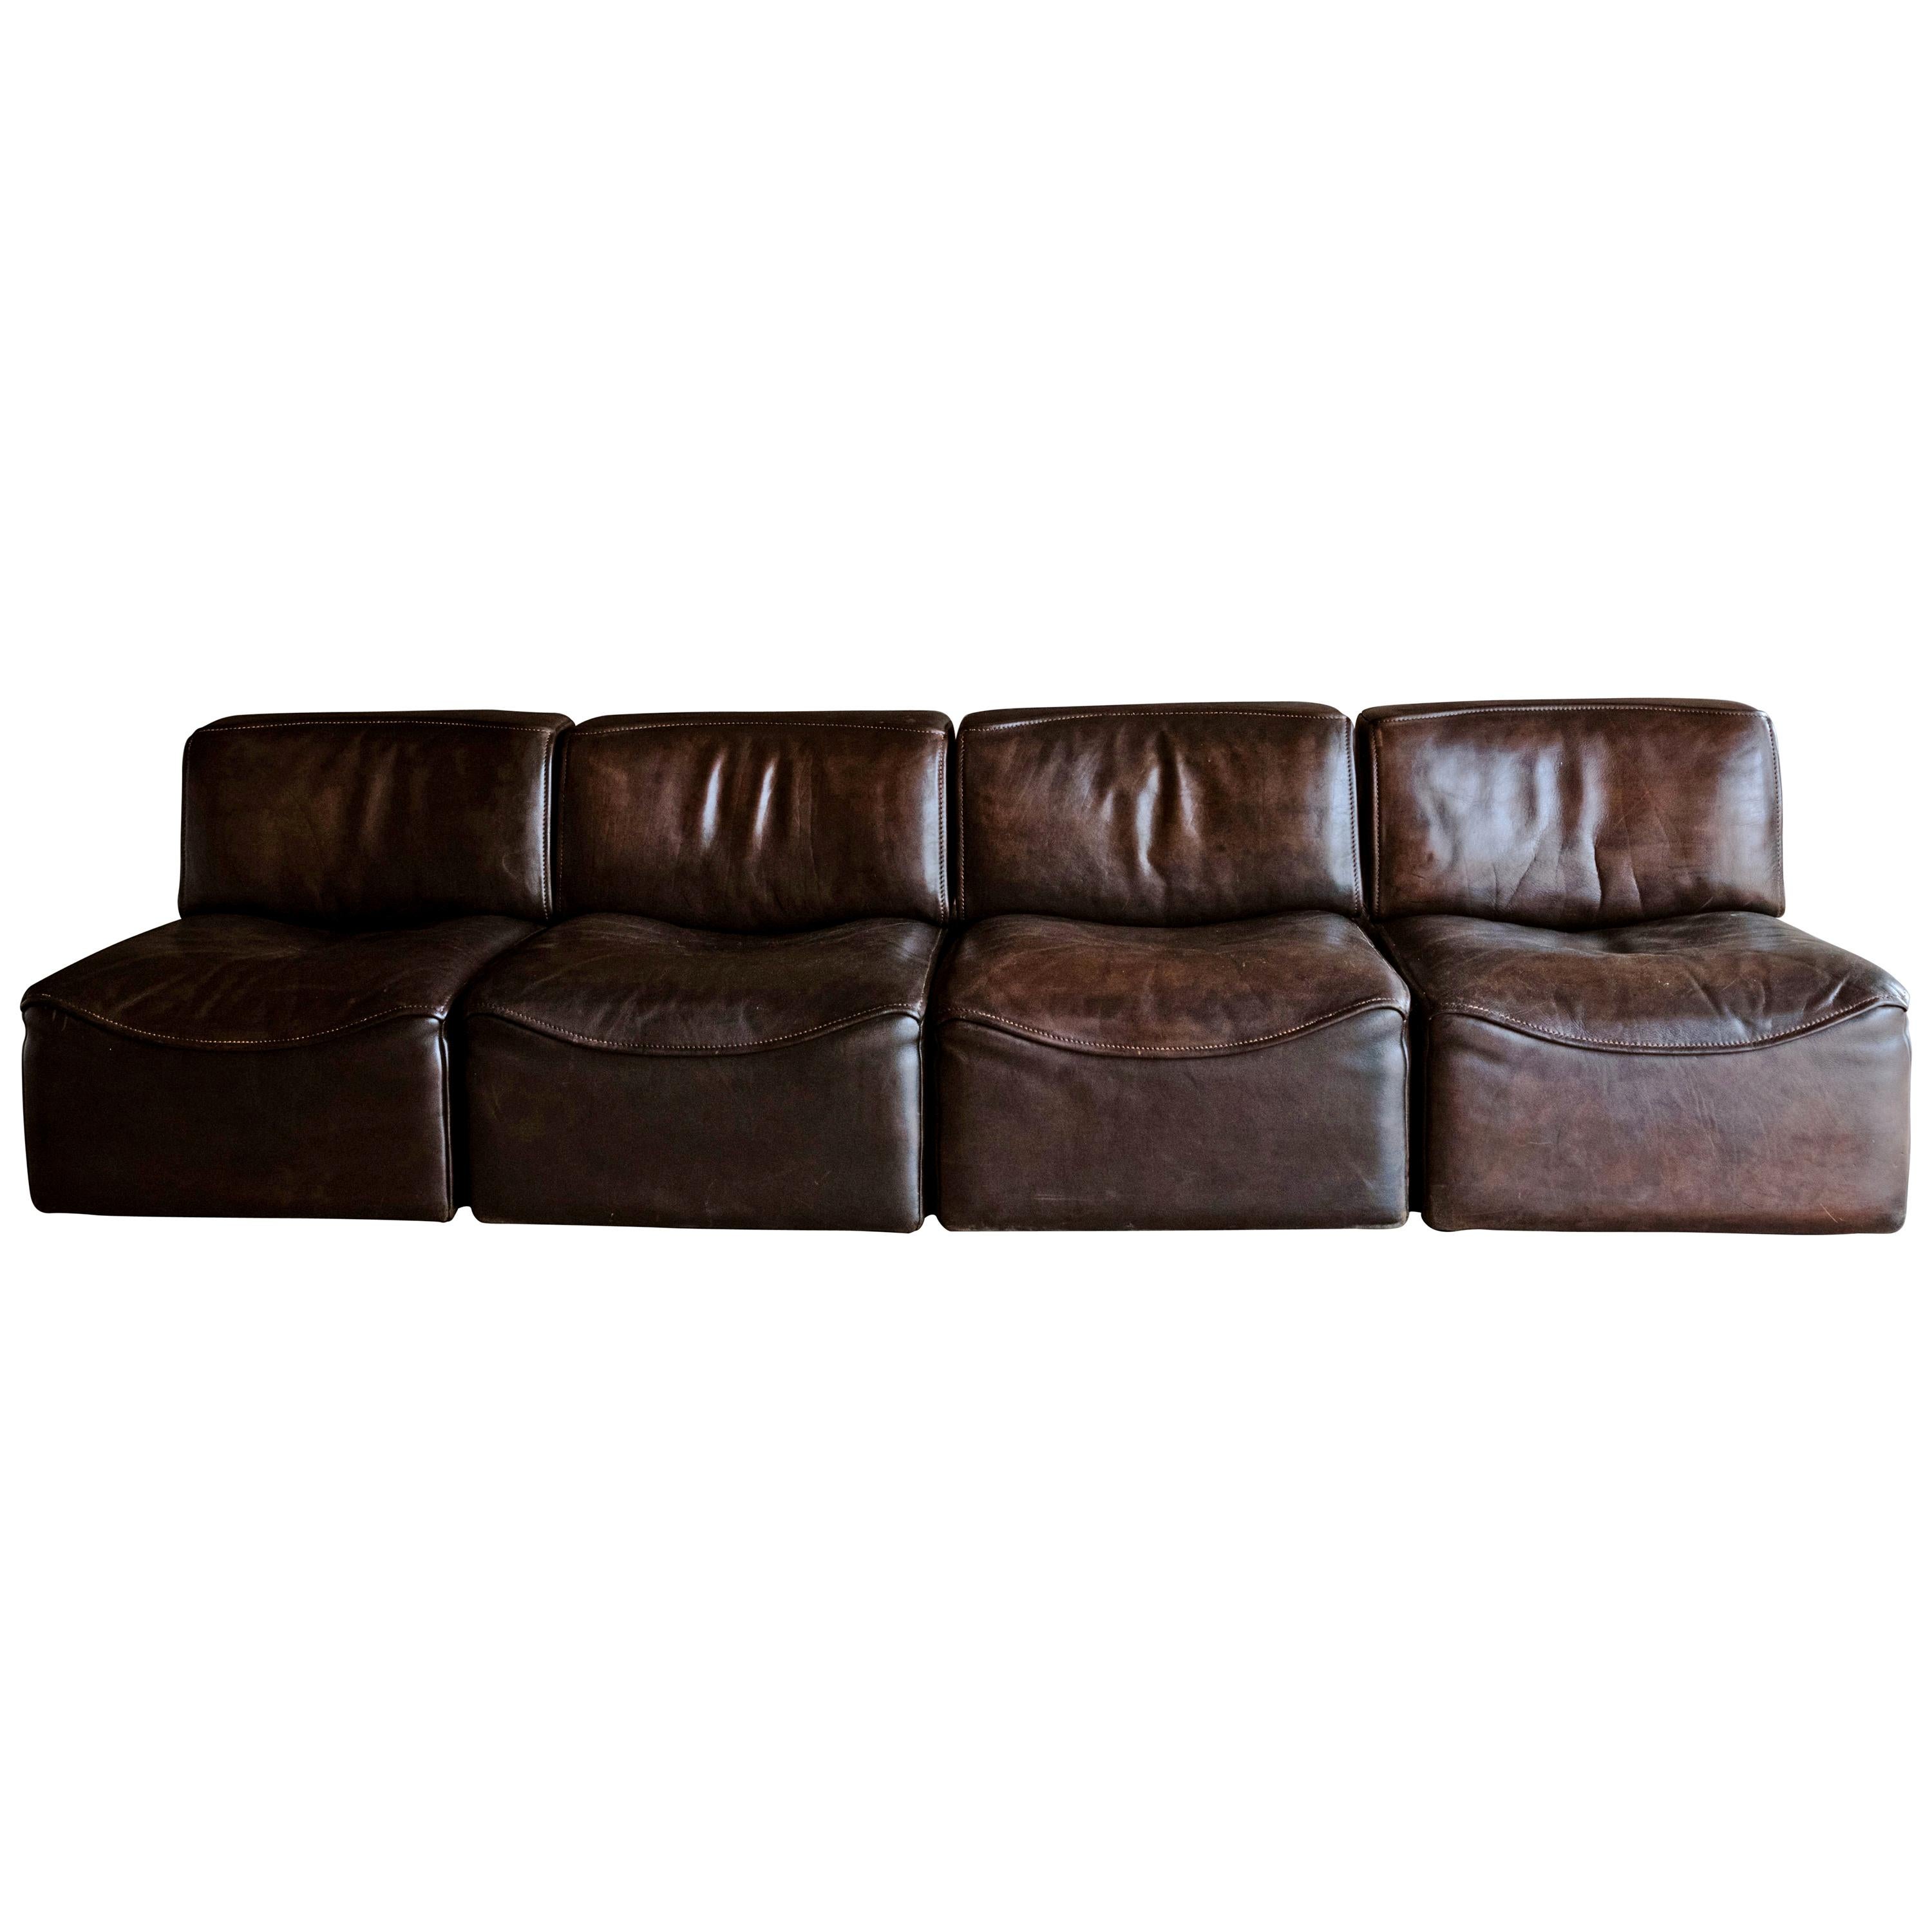 De Sede 'Ds-15' Modular Sofa in Buffalo Leather From Switzerland, 1970s